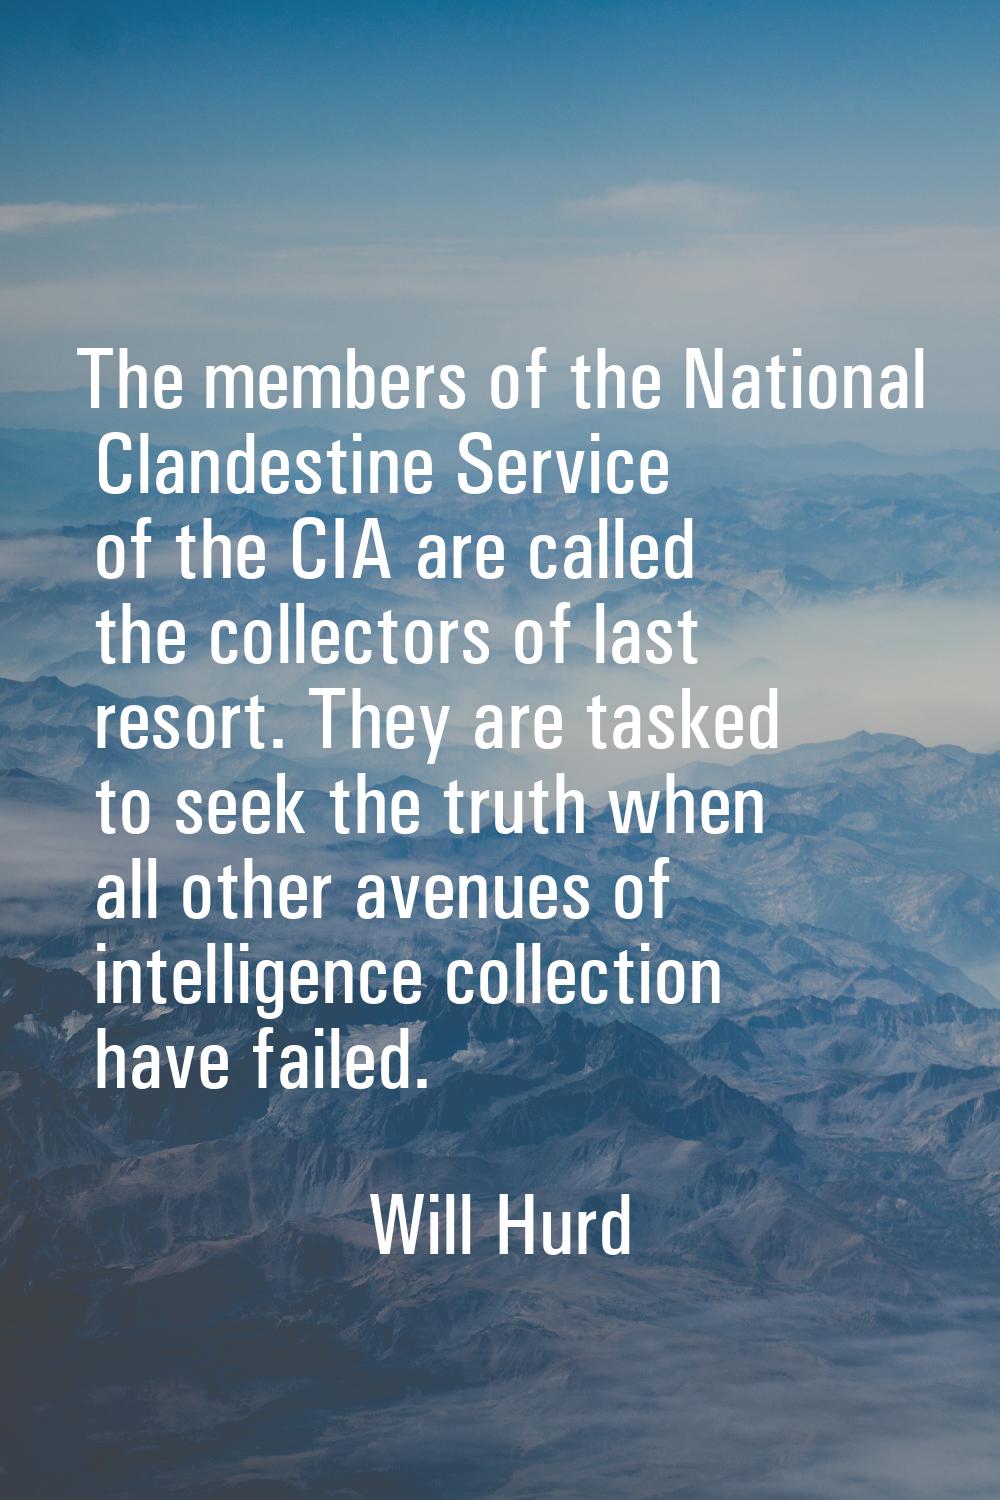 The members of the National Clandestine Service of the CIA are called the collectors of last resort